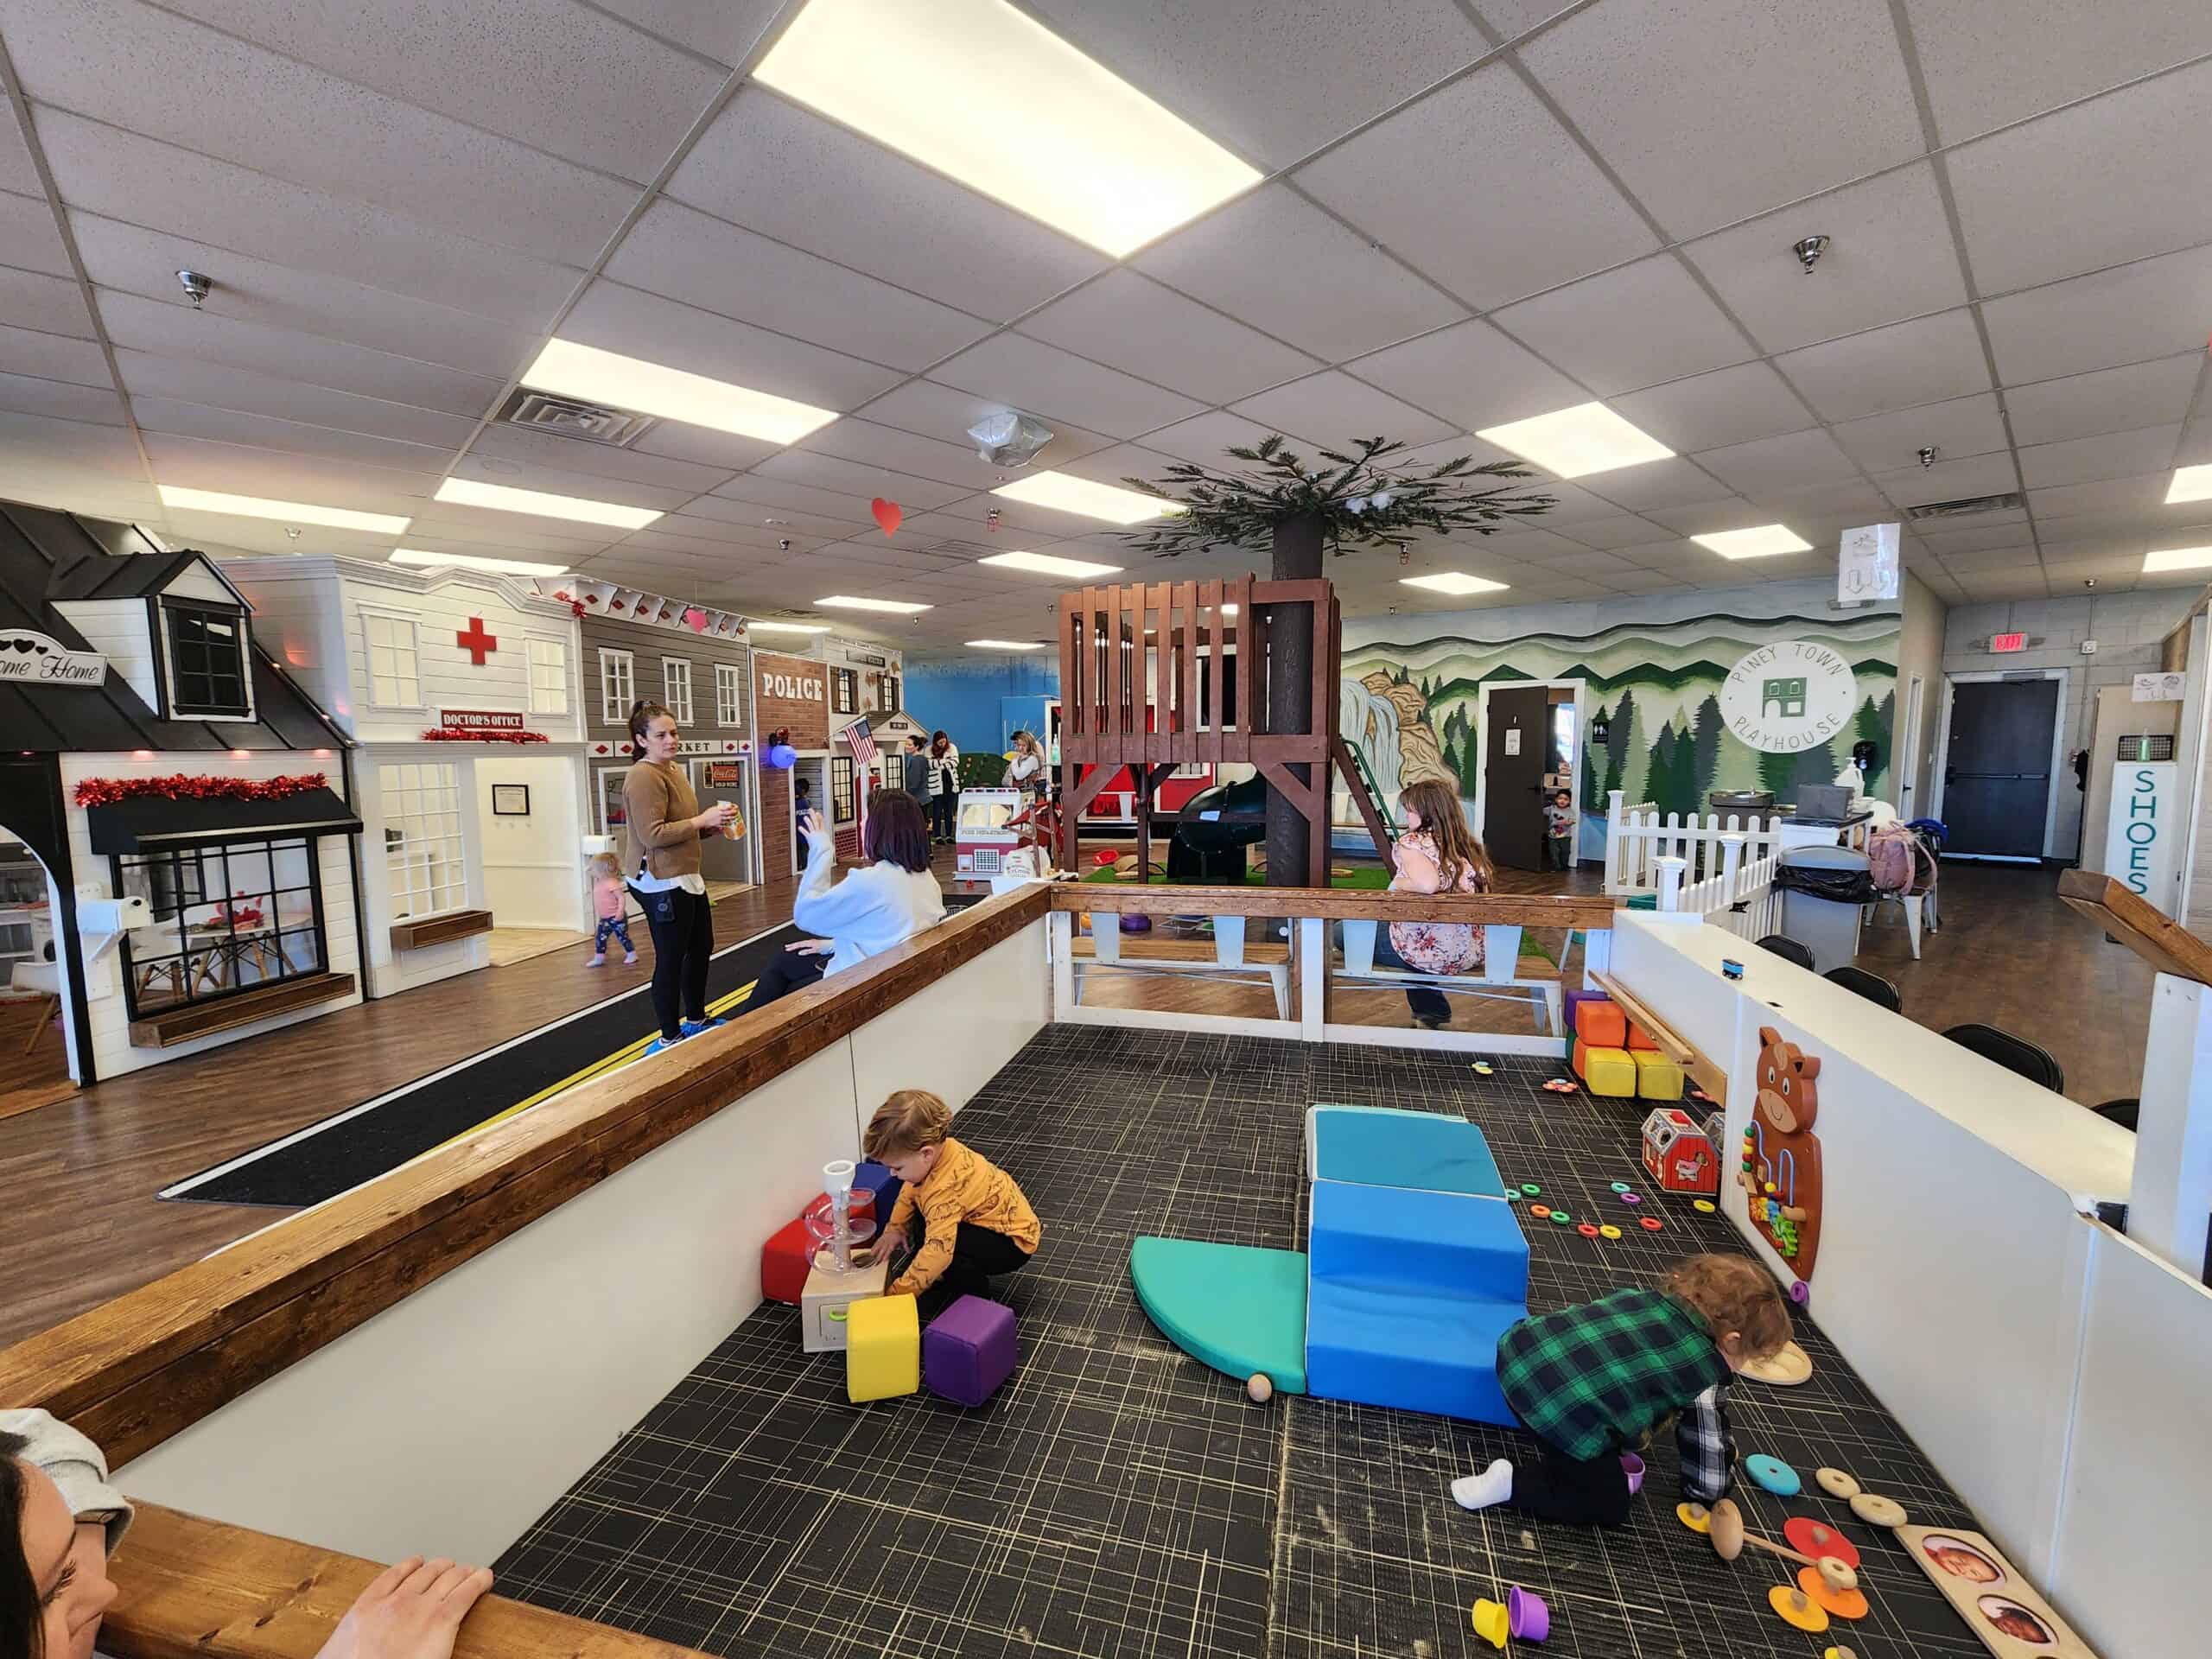 A bustling indoor play scene at Piney Town Playhouse in Fuquay-Varina, NC, with parents and children engaged in activities. The space features a miniature town with a black playhouse, a doctor's office, and a police station, fostering a fun and educational environment.